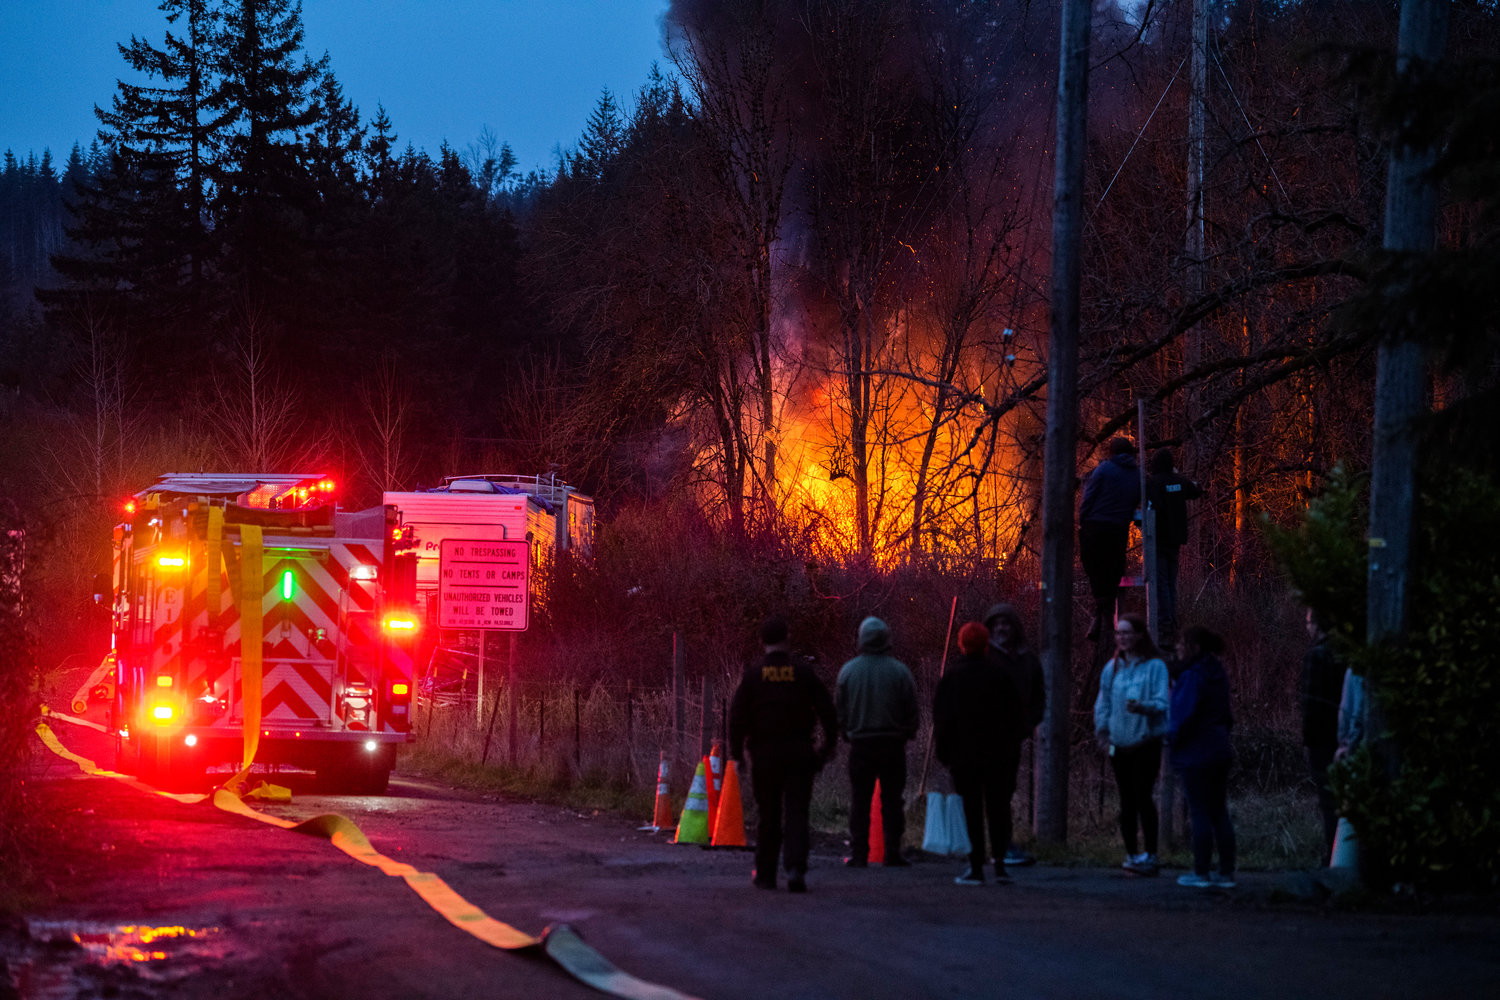 Riverside Fire Authority, Centralia Police and Chehalis Fire respond to a scene at the end of Eckerson Road in Centralia near Blakeslee Junction where flames and a column of smoke rose from a structure inside a homeless encampment Tuesday, March 28, 2023.